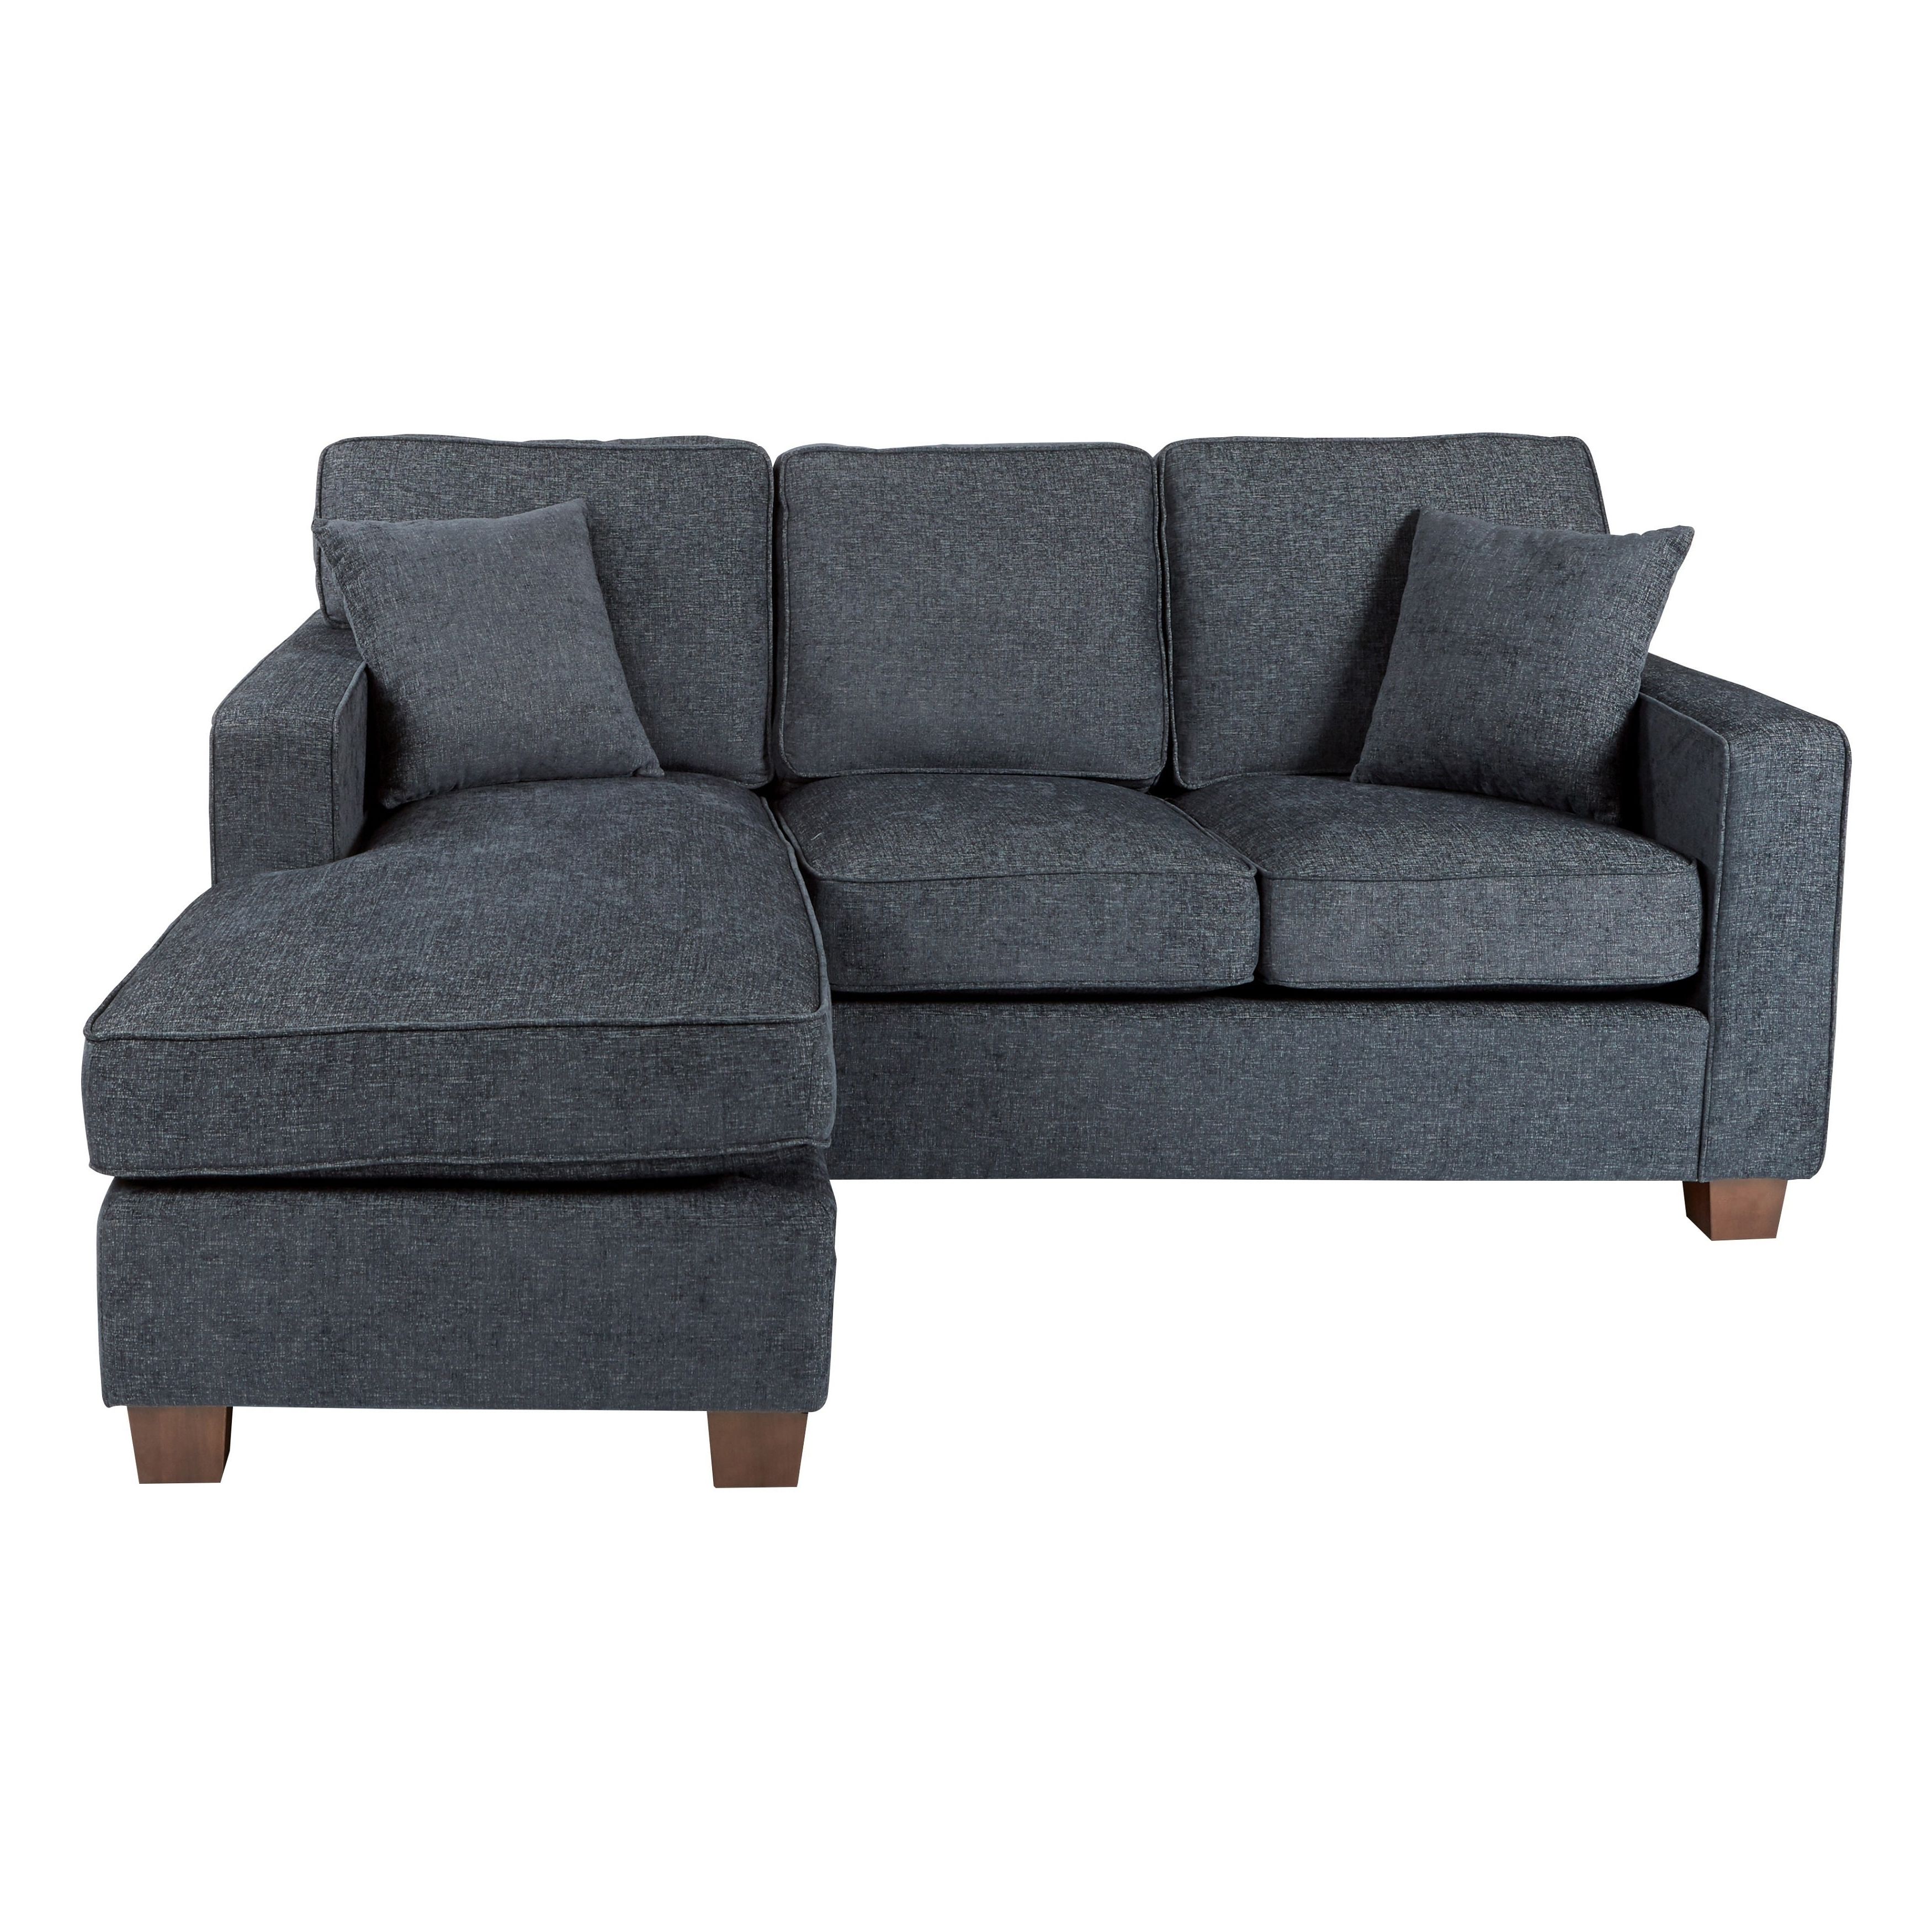 Well Known Overstock Sectional Sofas Within Porch & Den Over The Rhine Renner Reversible Chaise Sectional Sofa (View 16 of 20)